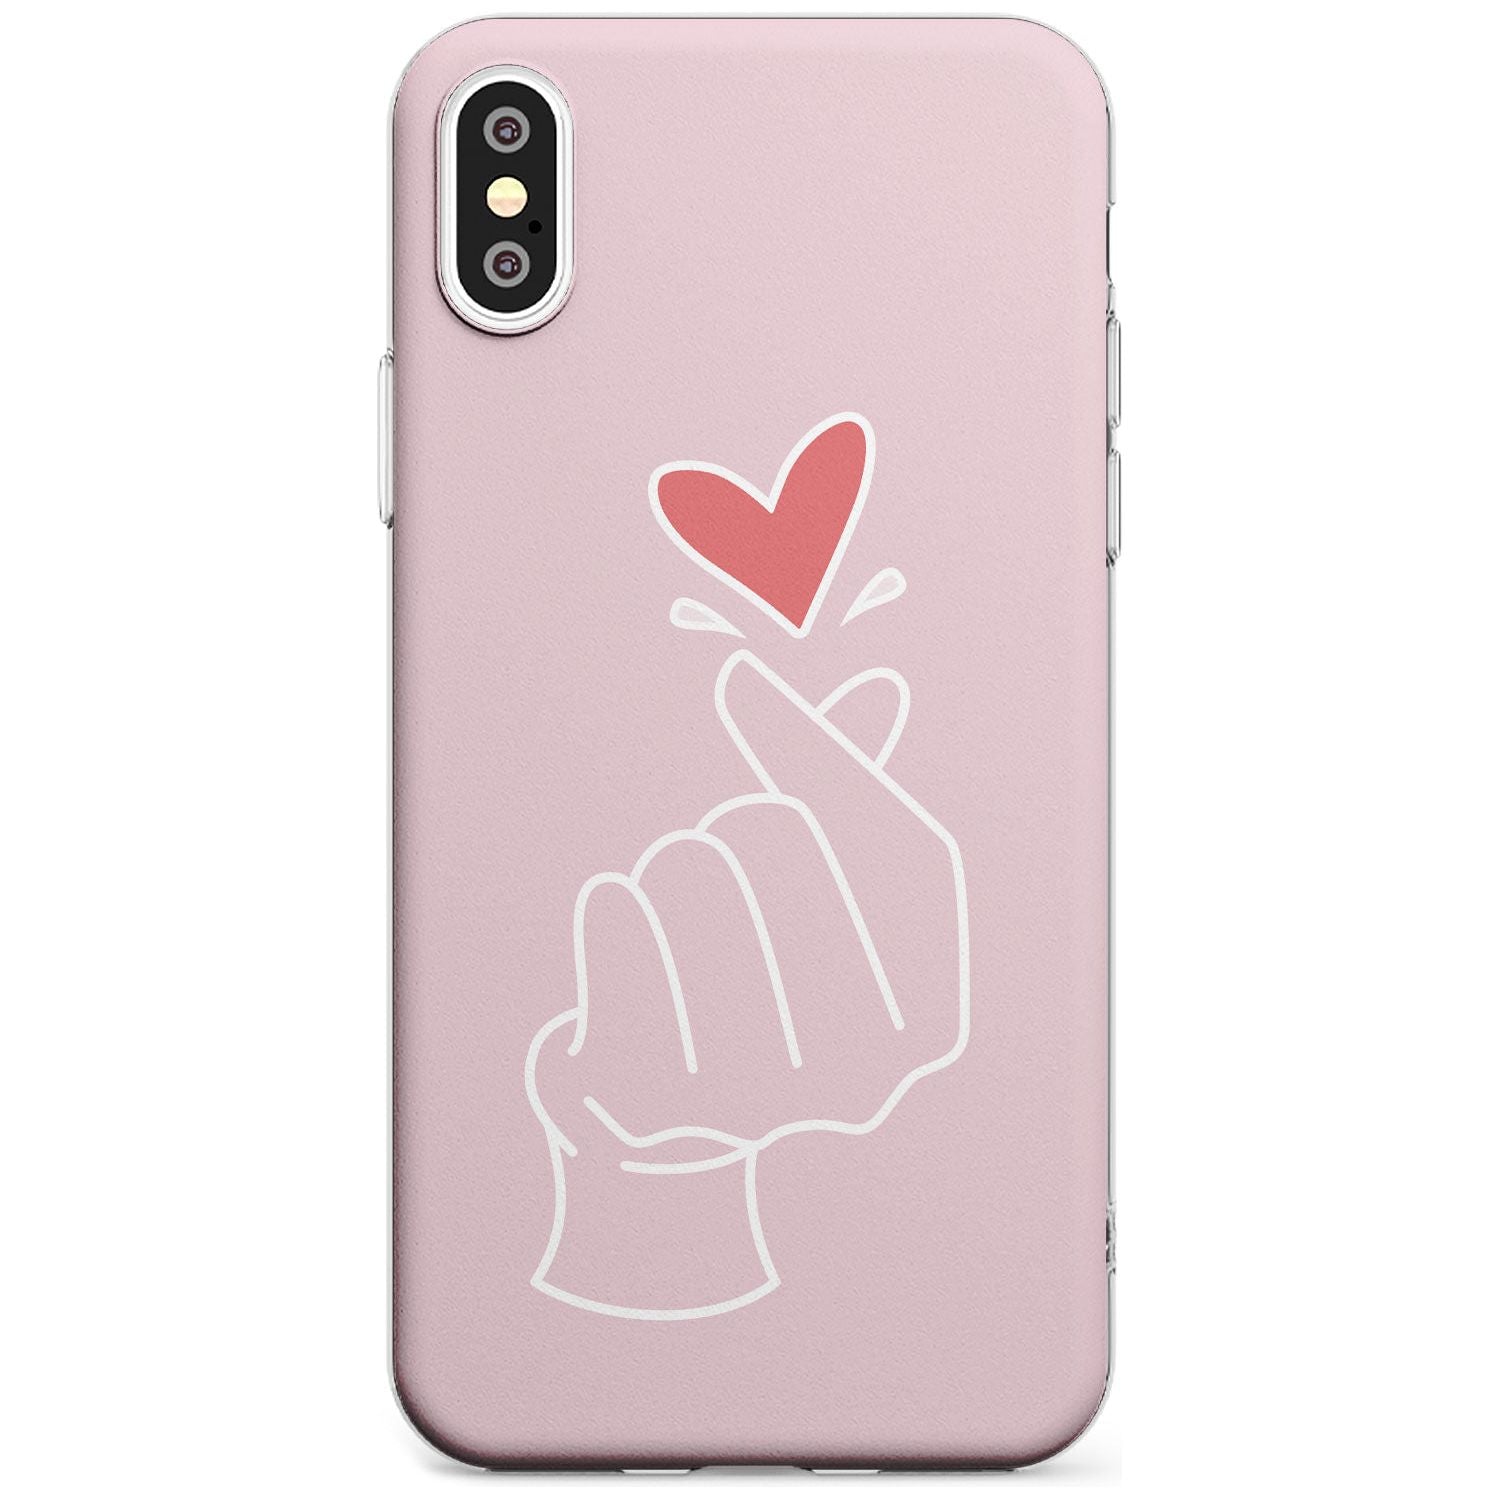 Finger Heart in Pink Black Impact Phone Case for iPhone X XS Max XR